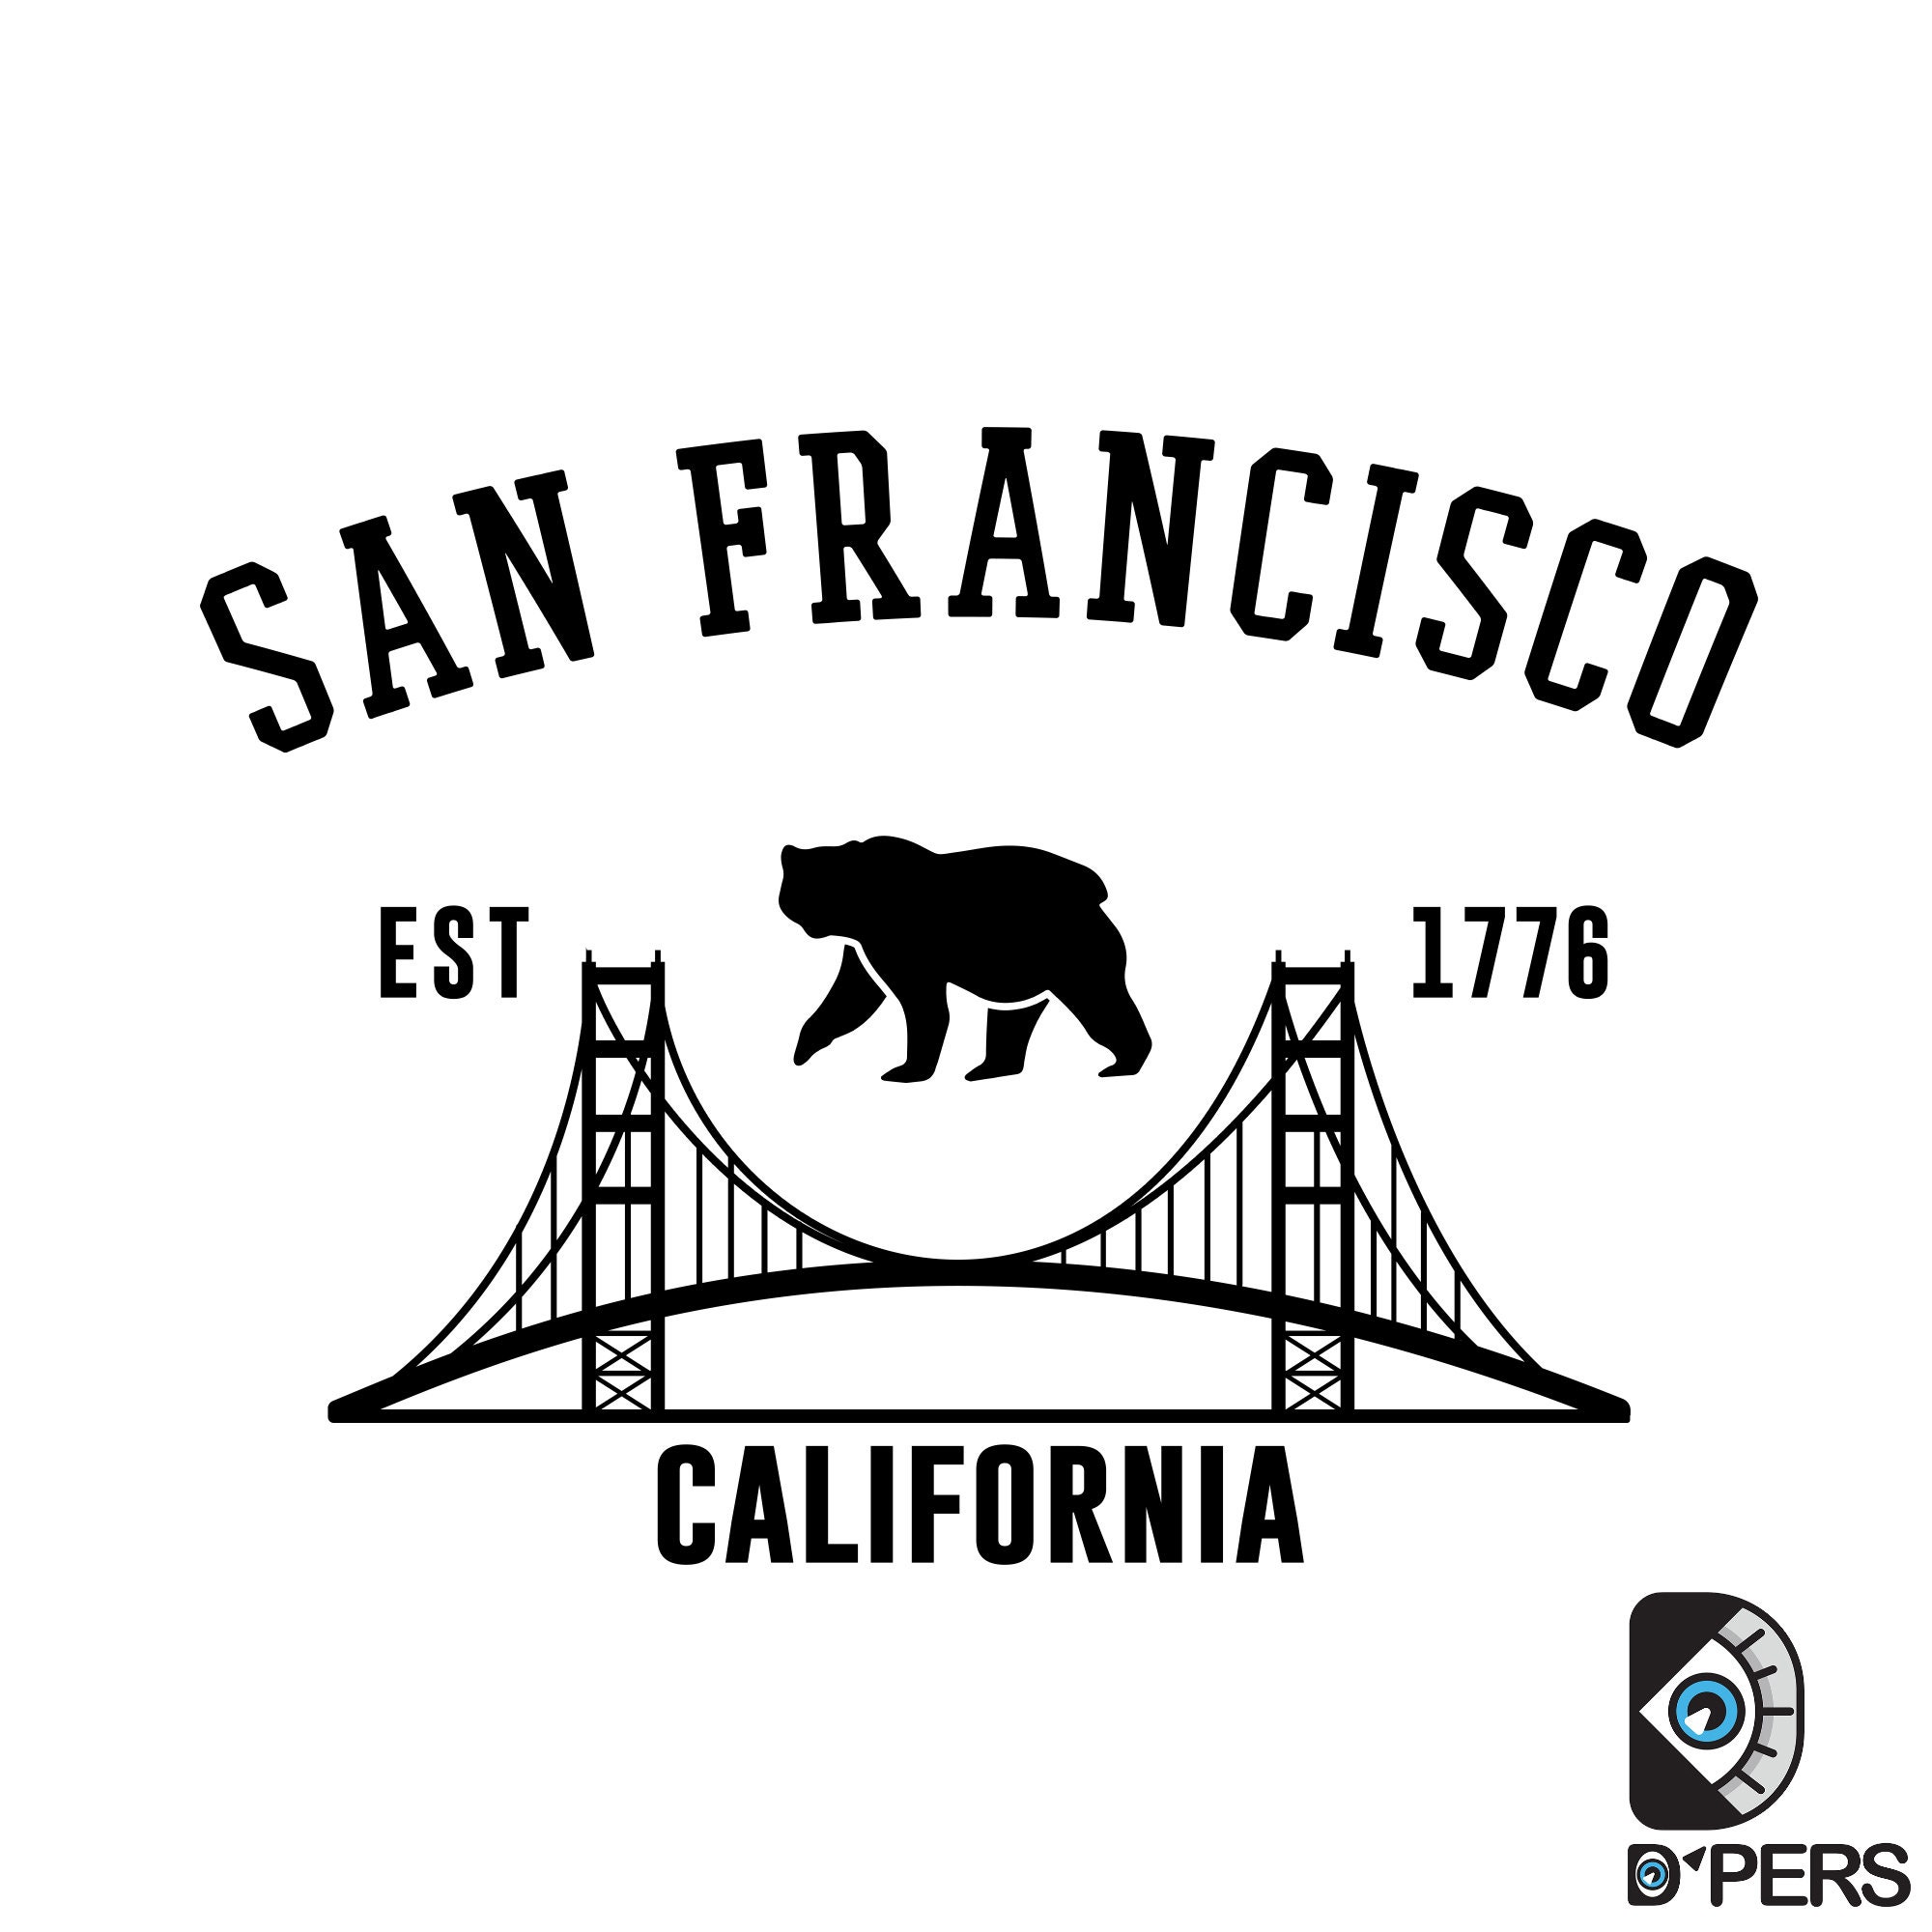 Niners Gold and Red San Francisco Golden Gate Bridge 49 Football Sports  Sticker 